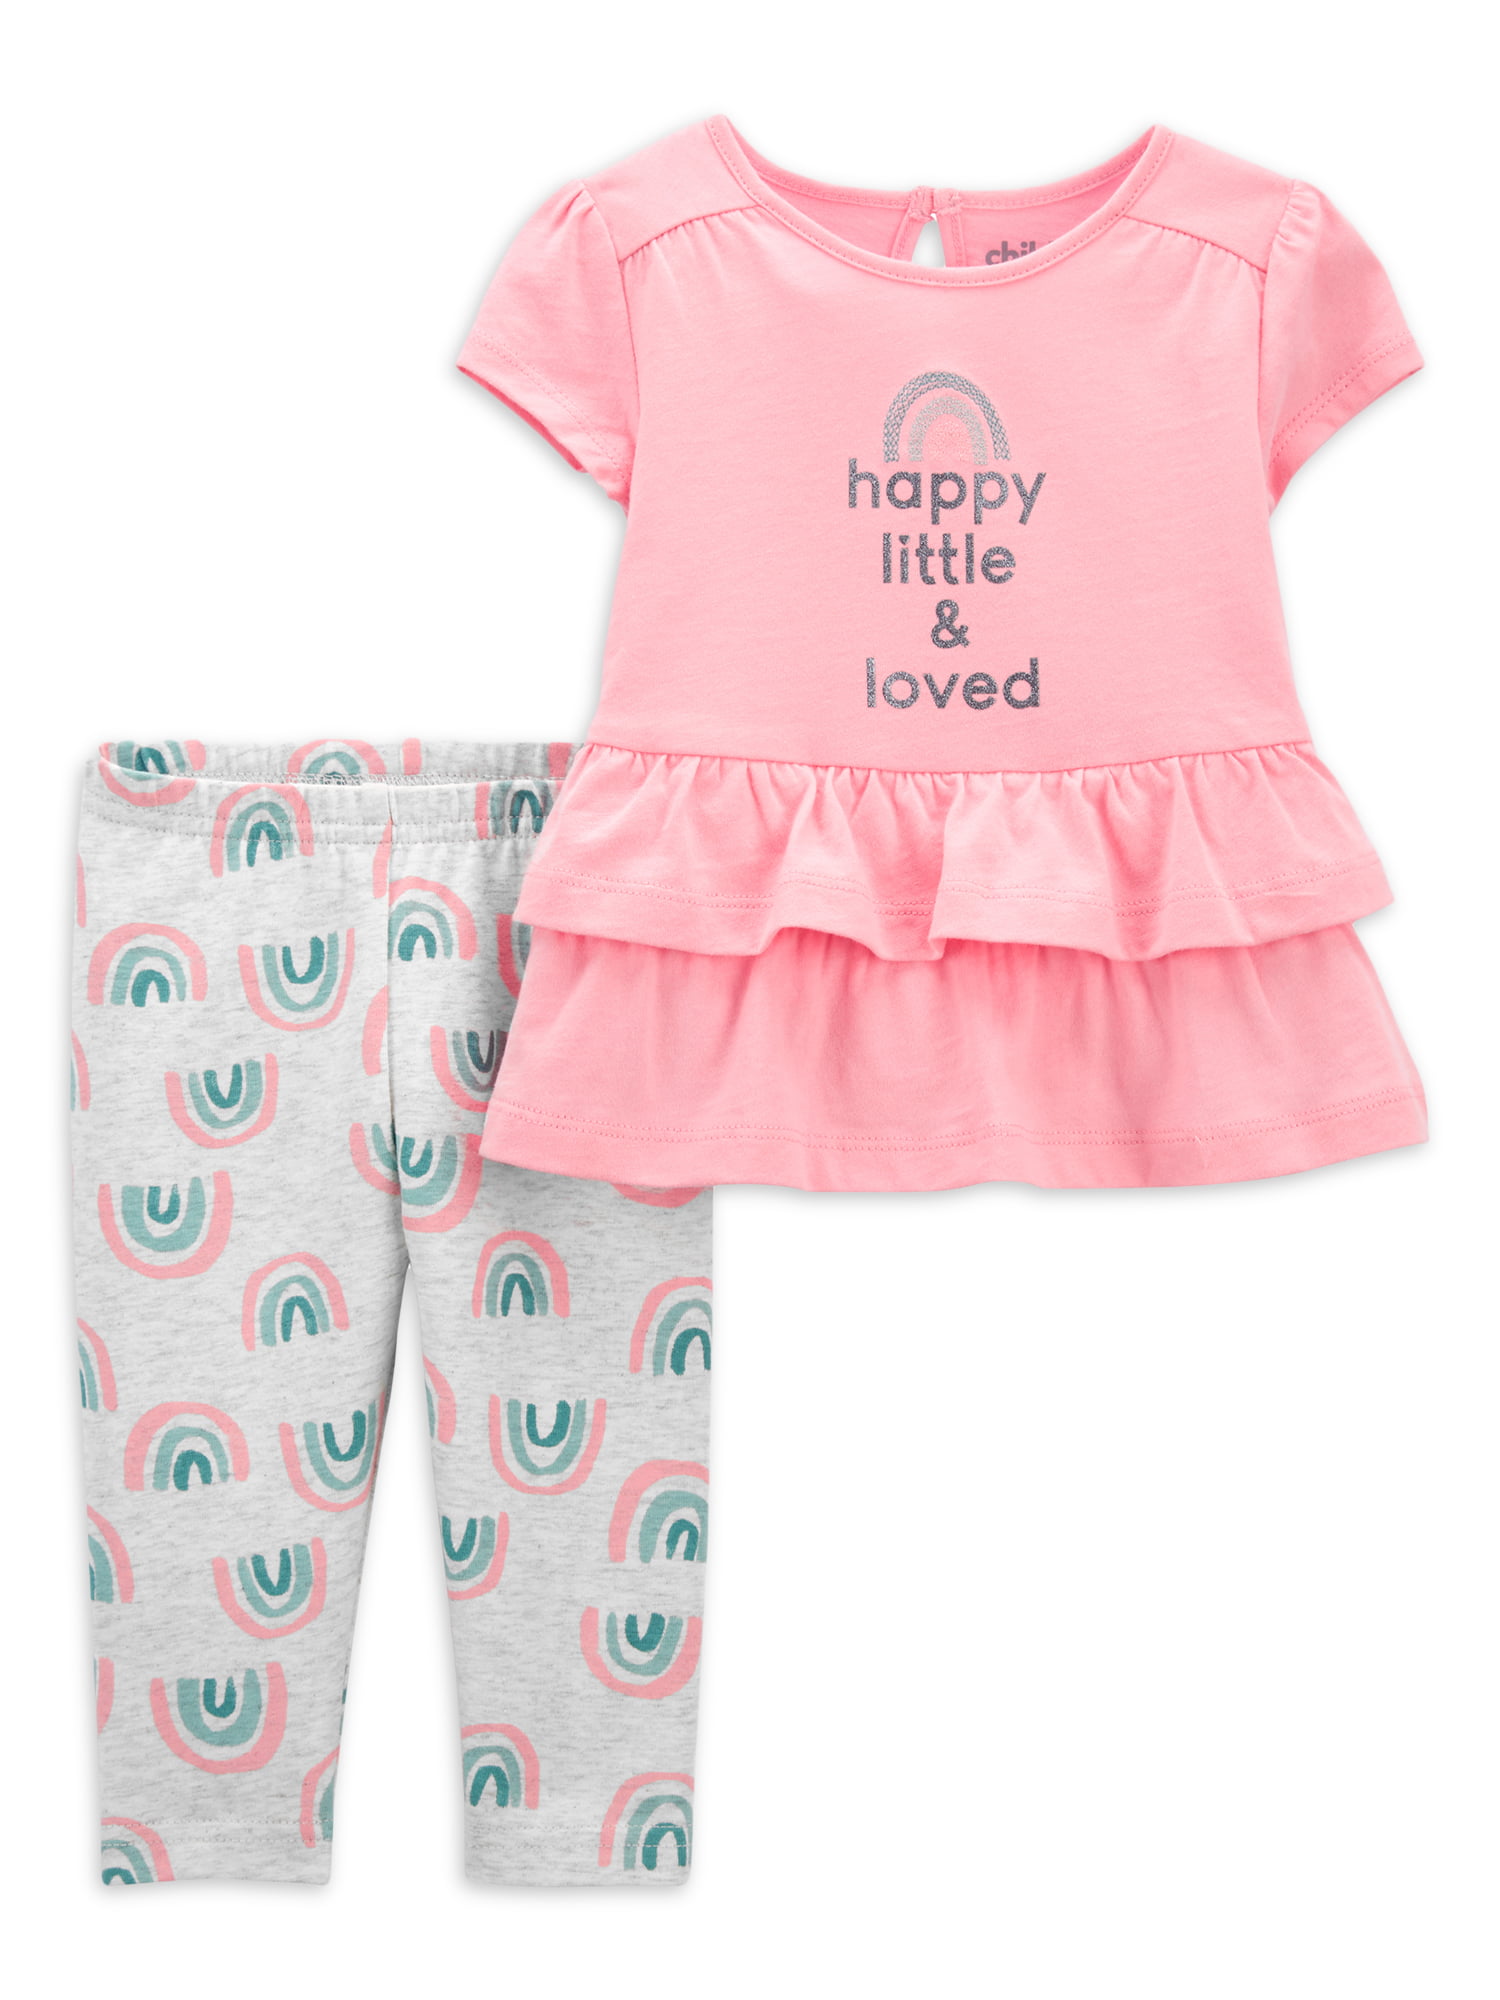 2-Piece Outfit Set Size 2T Carter's Toddler Girls Top & Leggings 4T 3T 